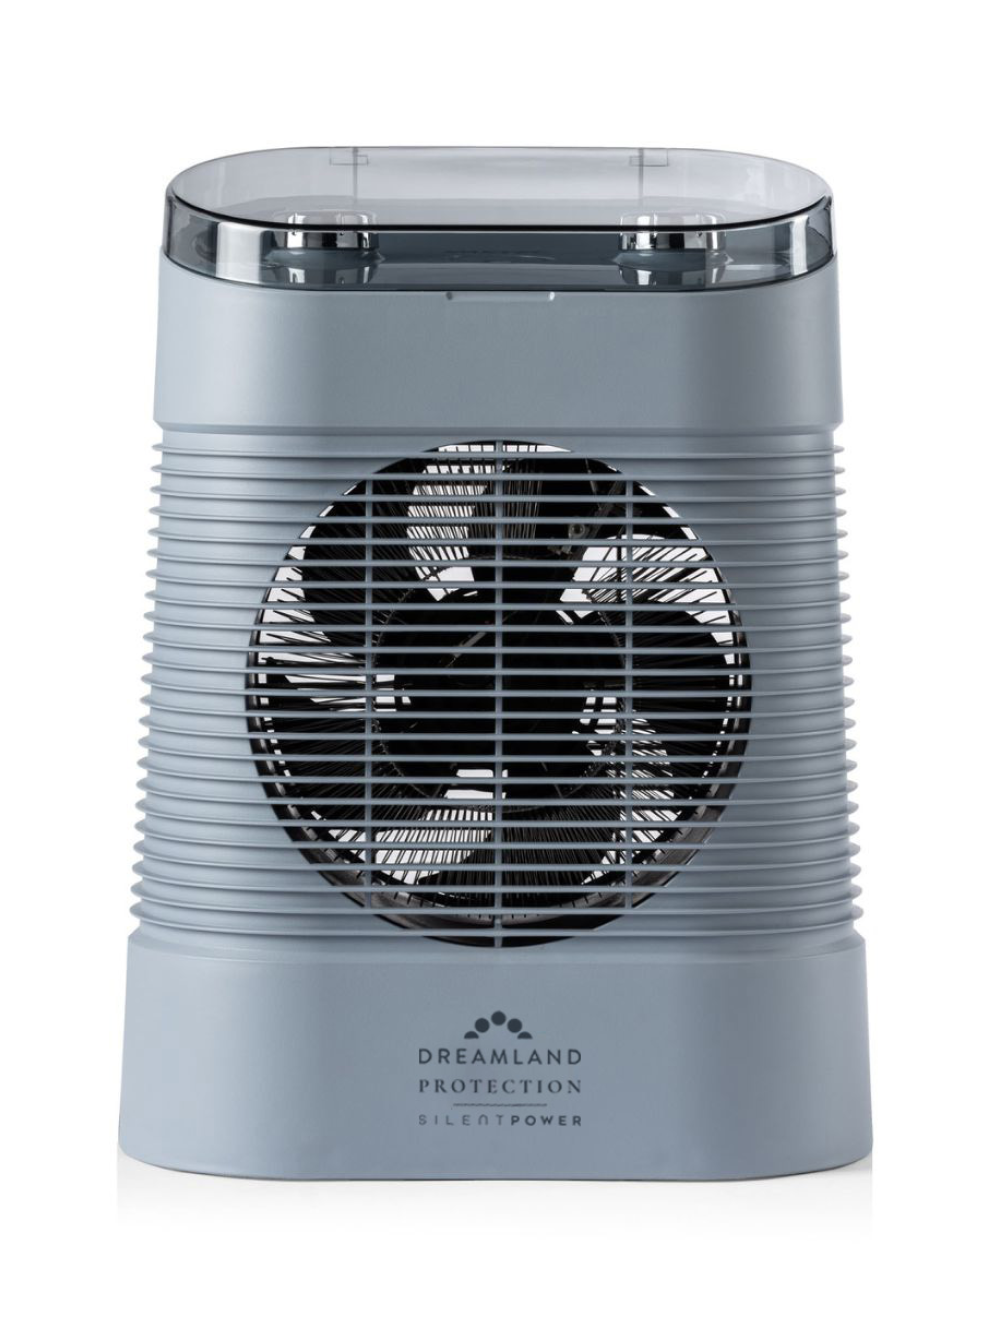 Dreamland Silent Power Protection Fan Heater featured image